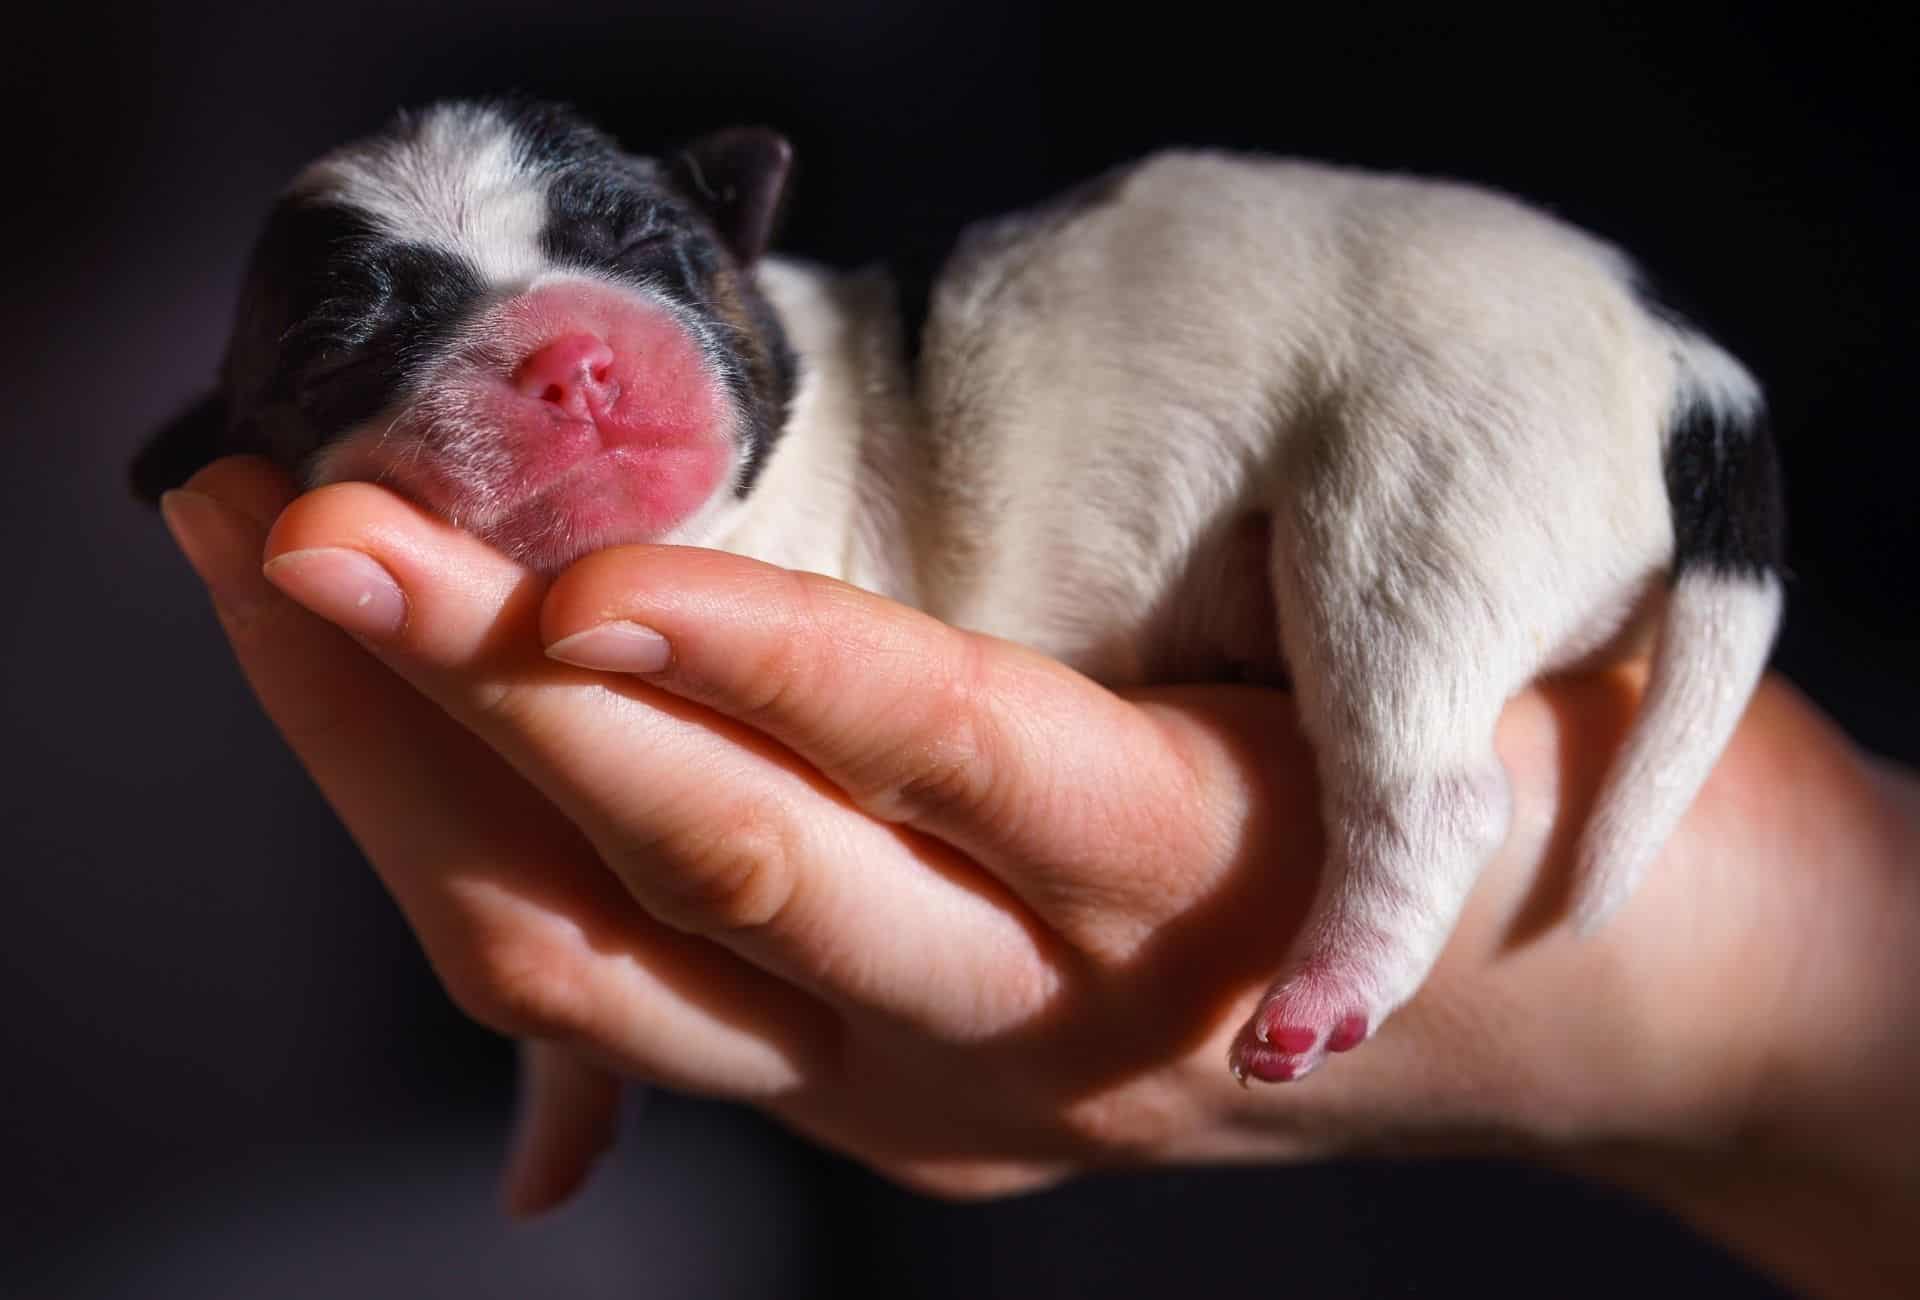 Black and white newborn puppy is carefully cradled in human hands.